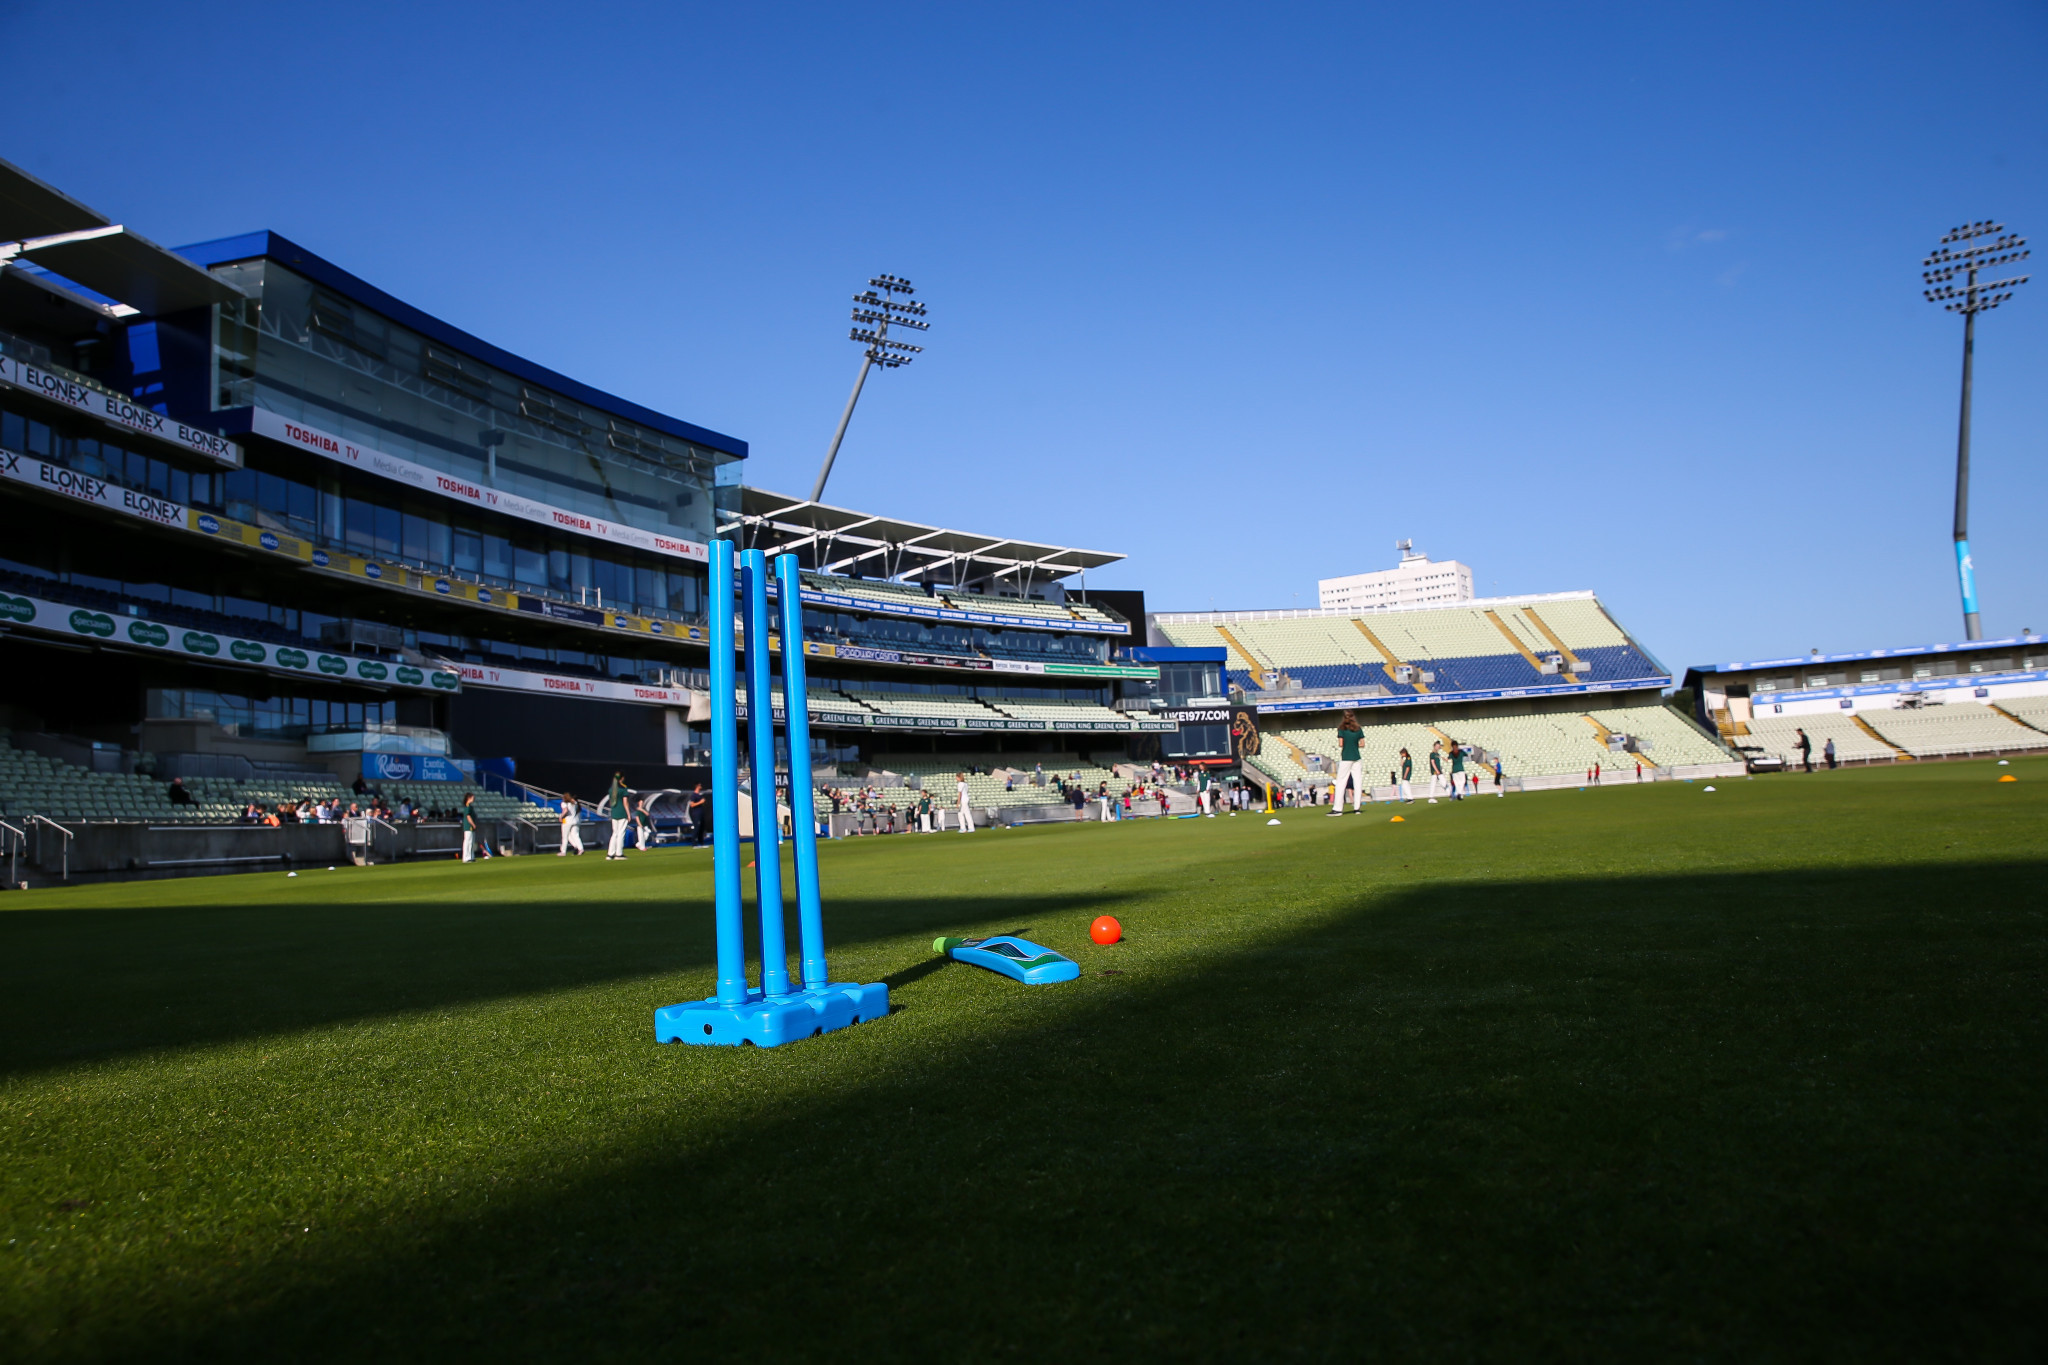 Women's T20 cricket at Edgbaston is set to be a highlight of the Birmingham 2022 sport programme ©Getty Images